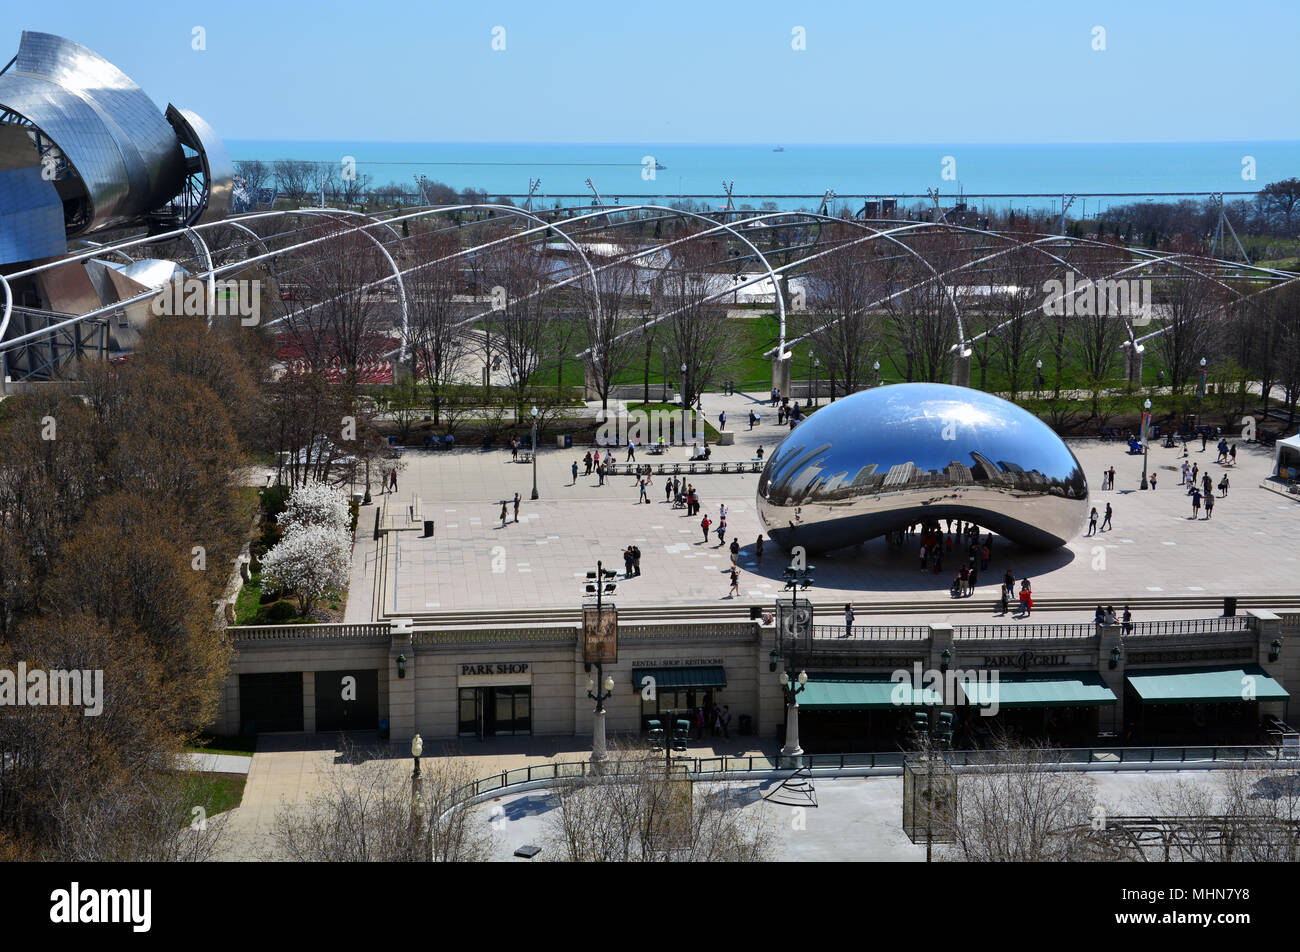 View of Cloud Gate, also known as "The Bean", from an office building across the street on a warm spring day at Chicago's Millennium Park. Stock Photo